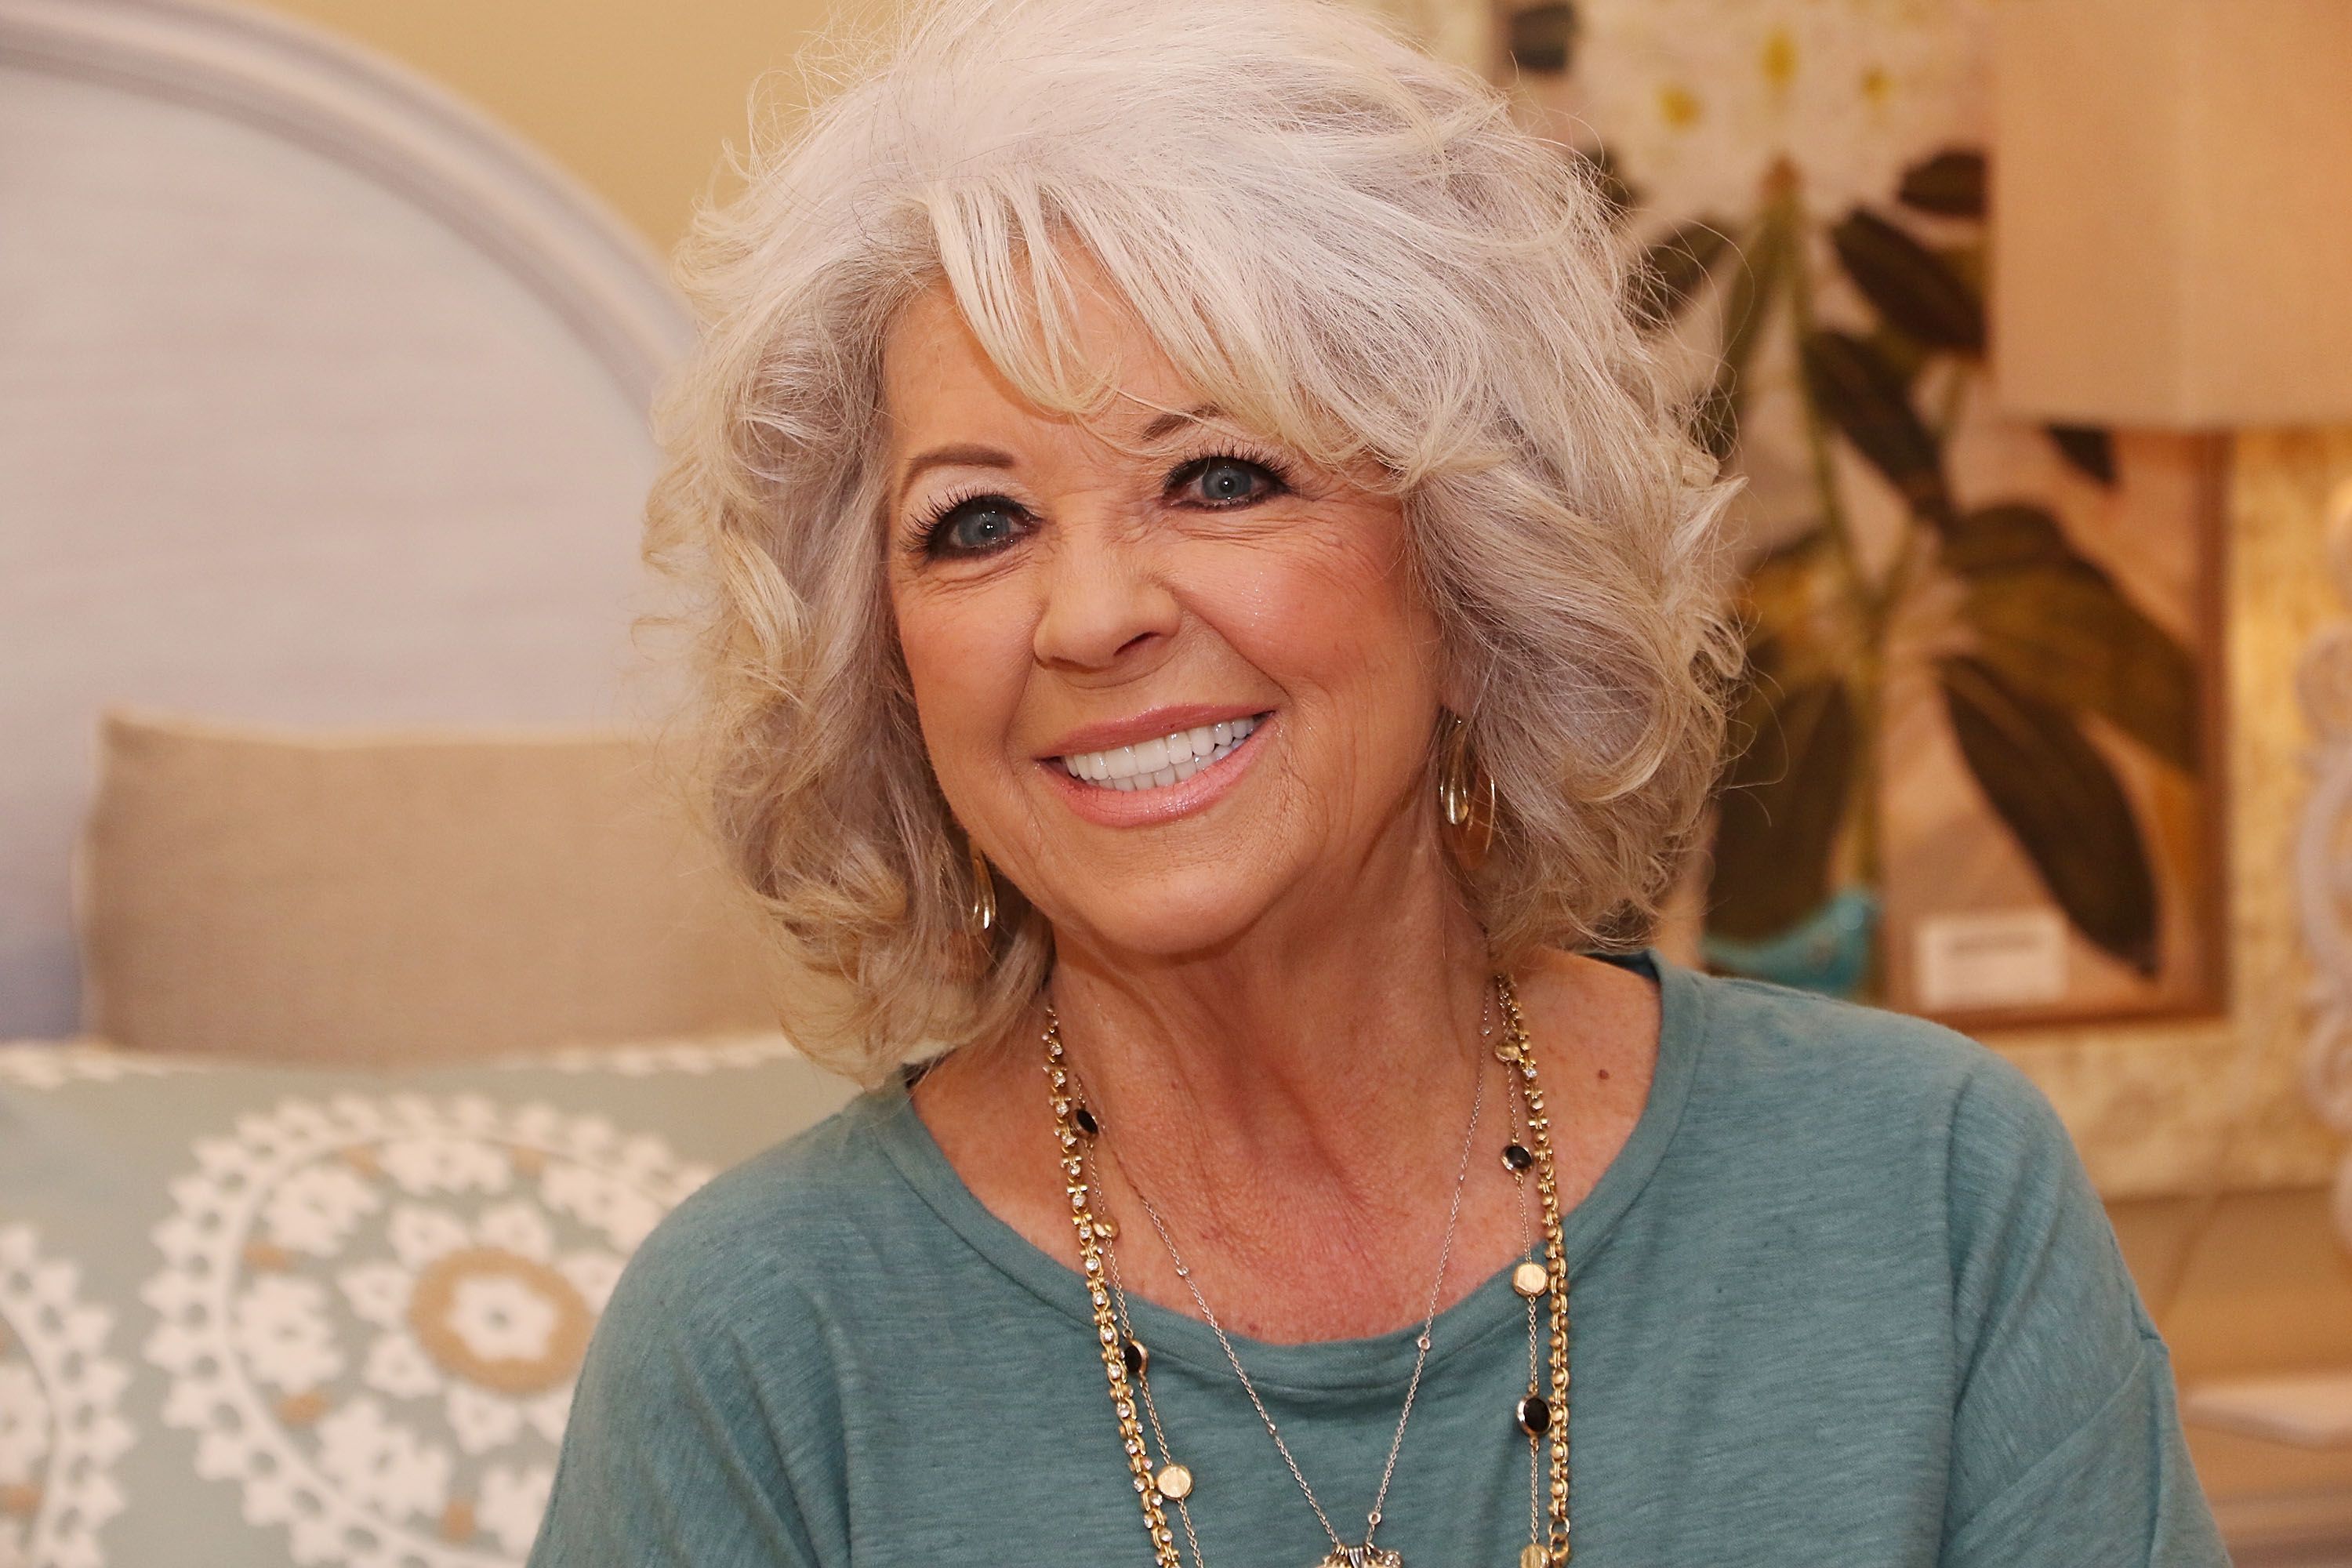 Paula Deen signs copies of her book "Cuts the Fat" in 2016, Boca Raton, Florida | Source: Getty Images